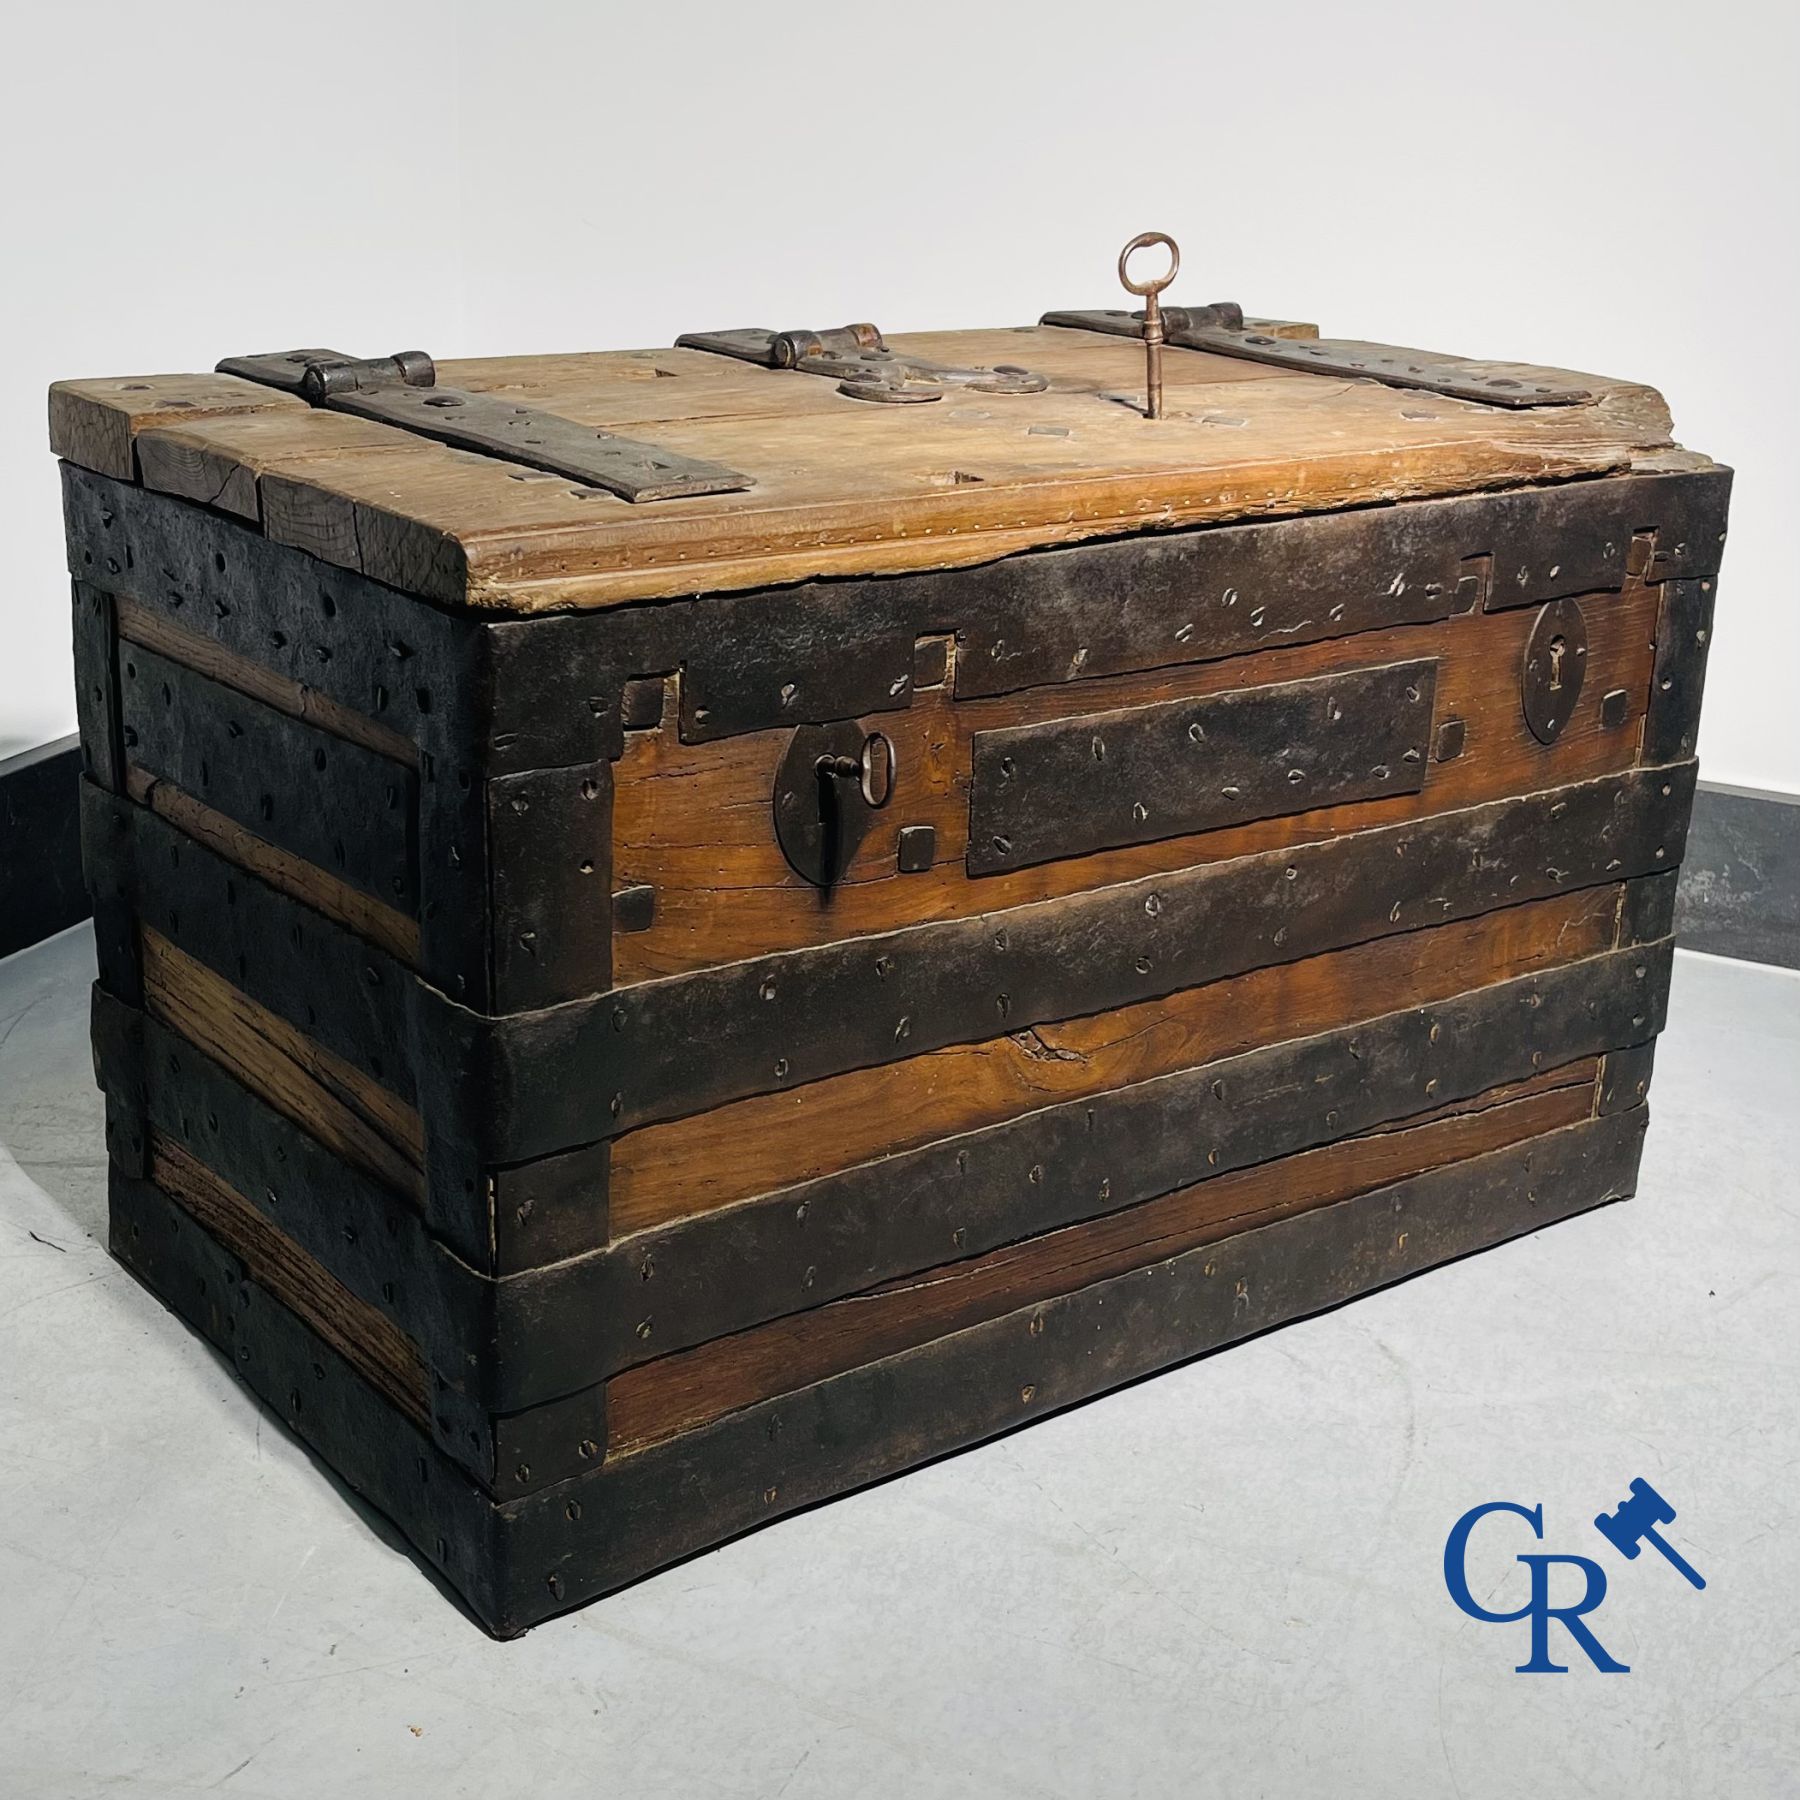 Antique wooden chest with hardware and lockwork in forging.